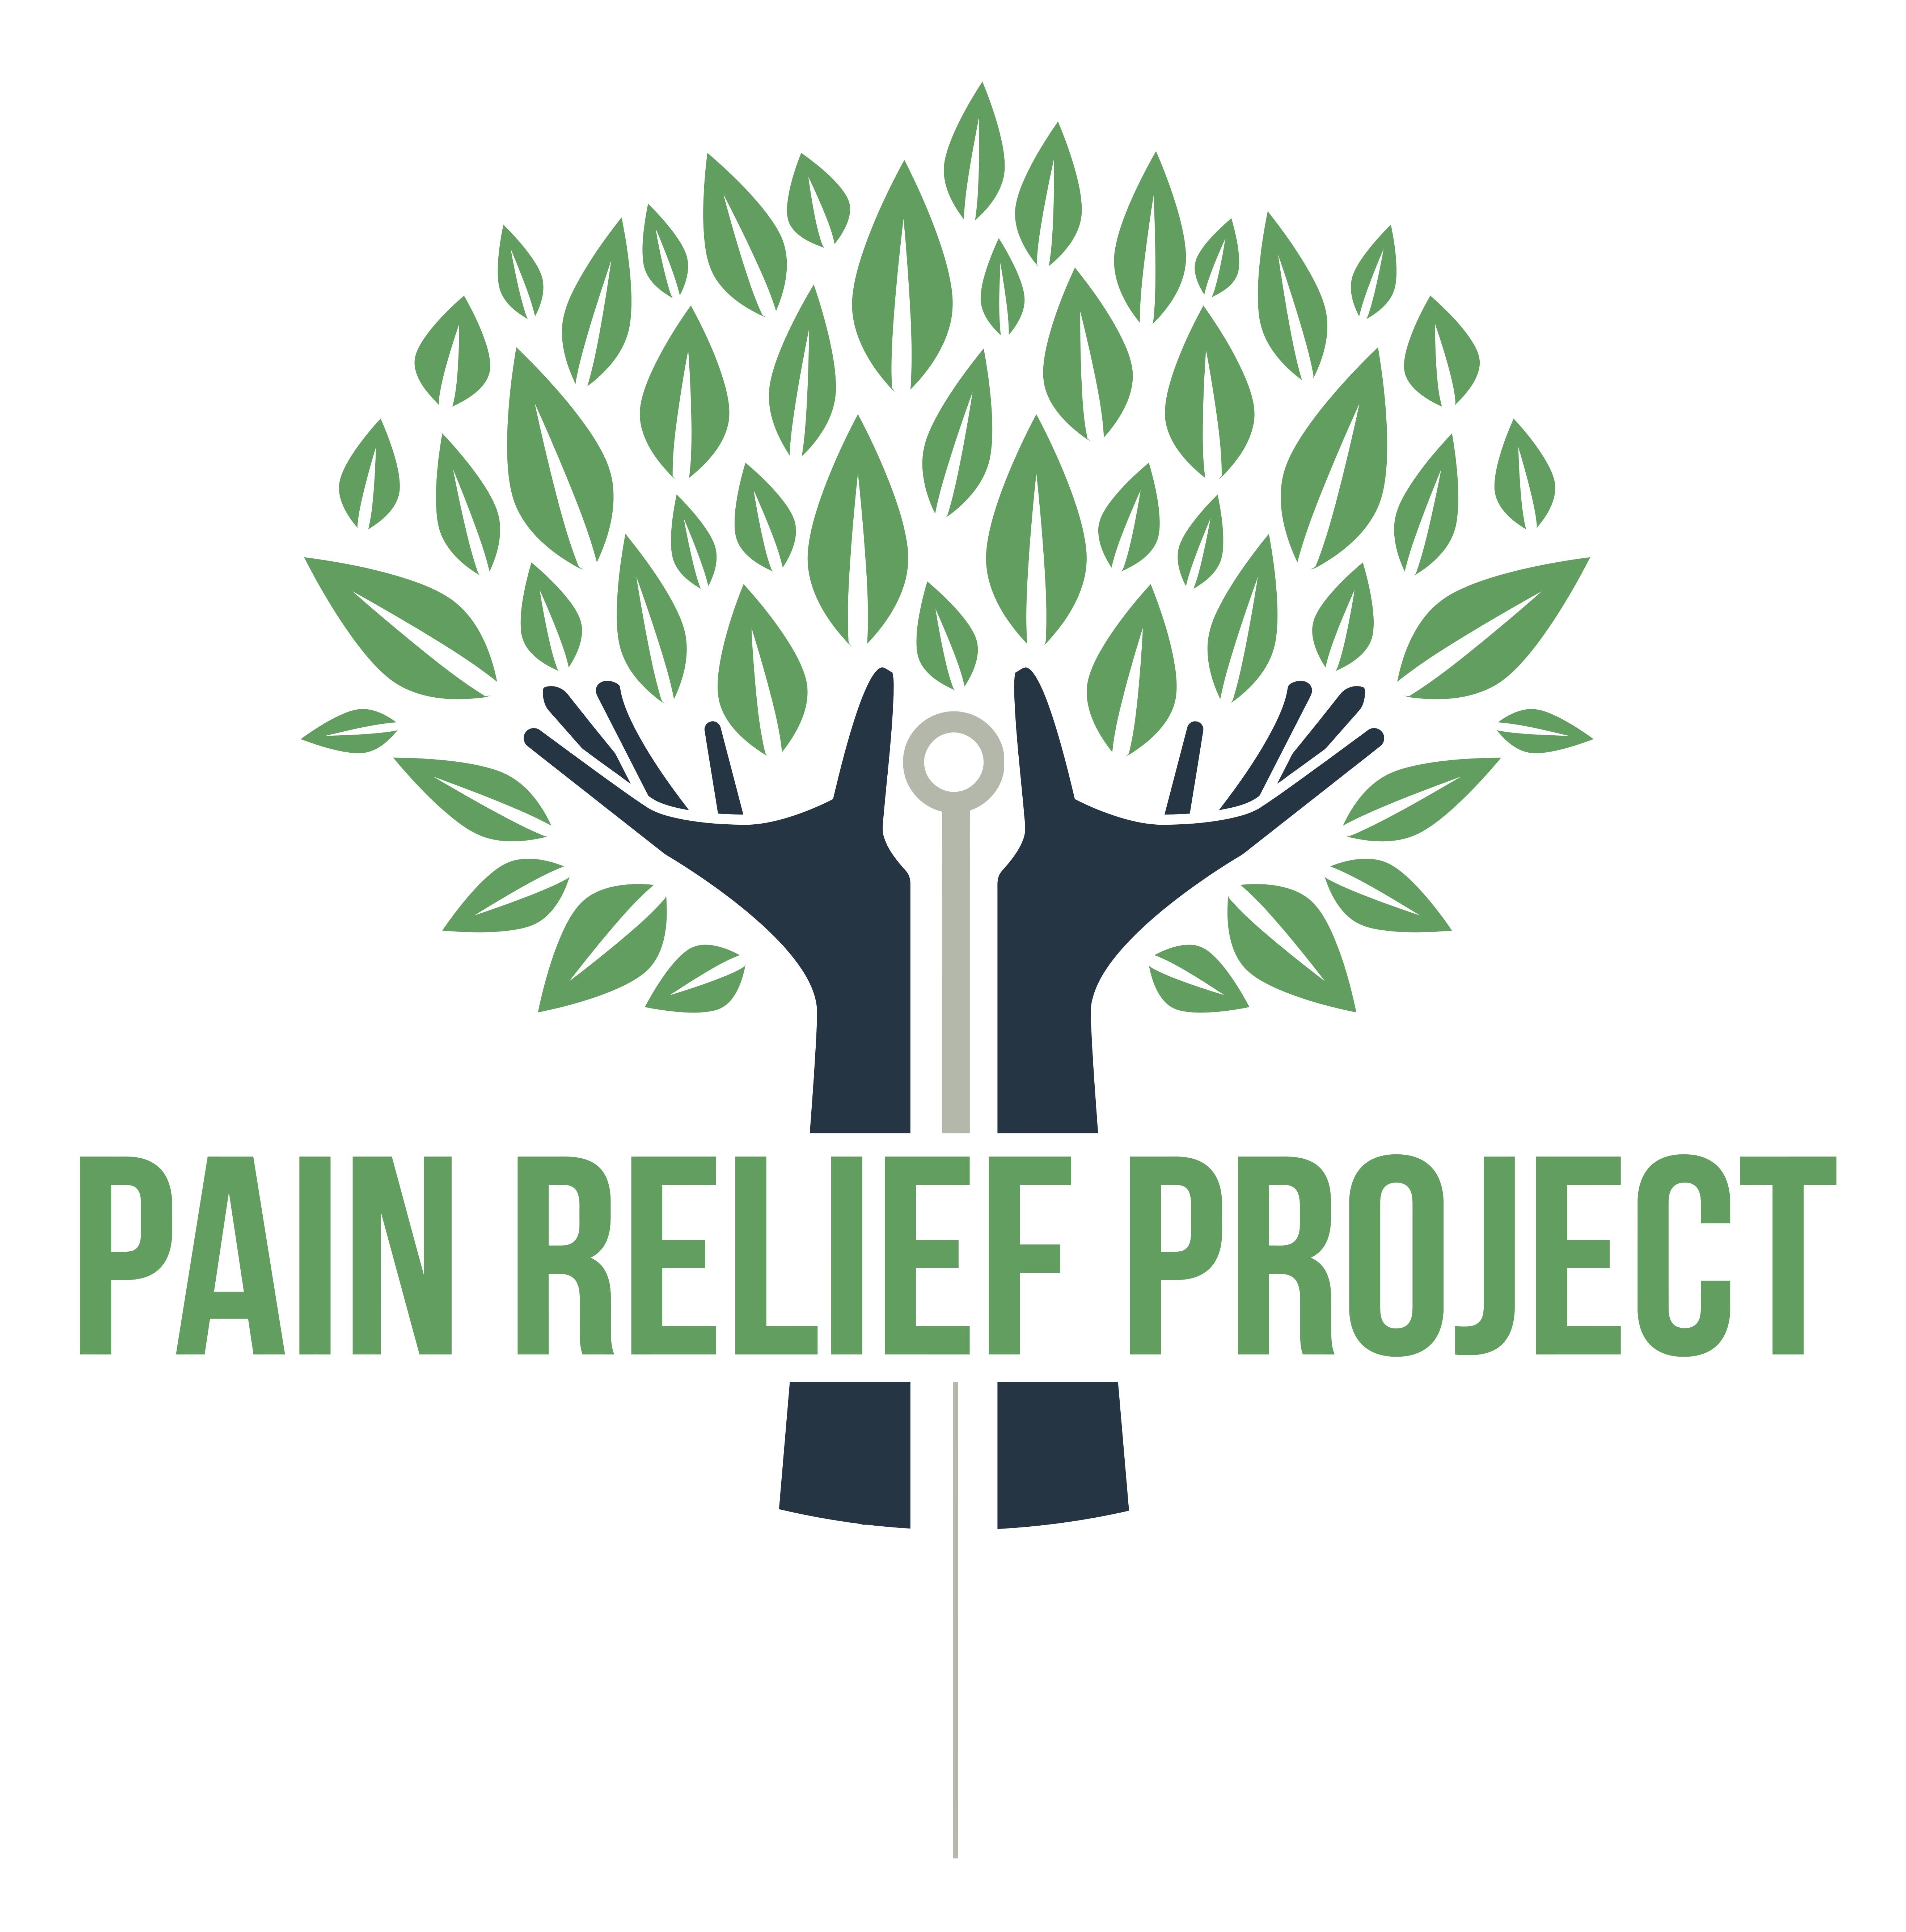 Pain Relief Project logo